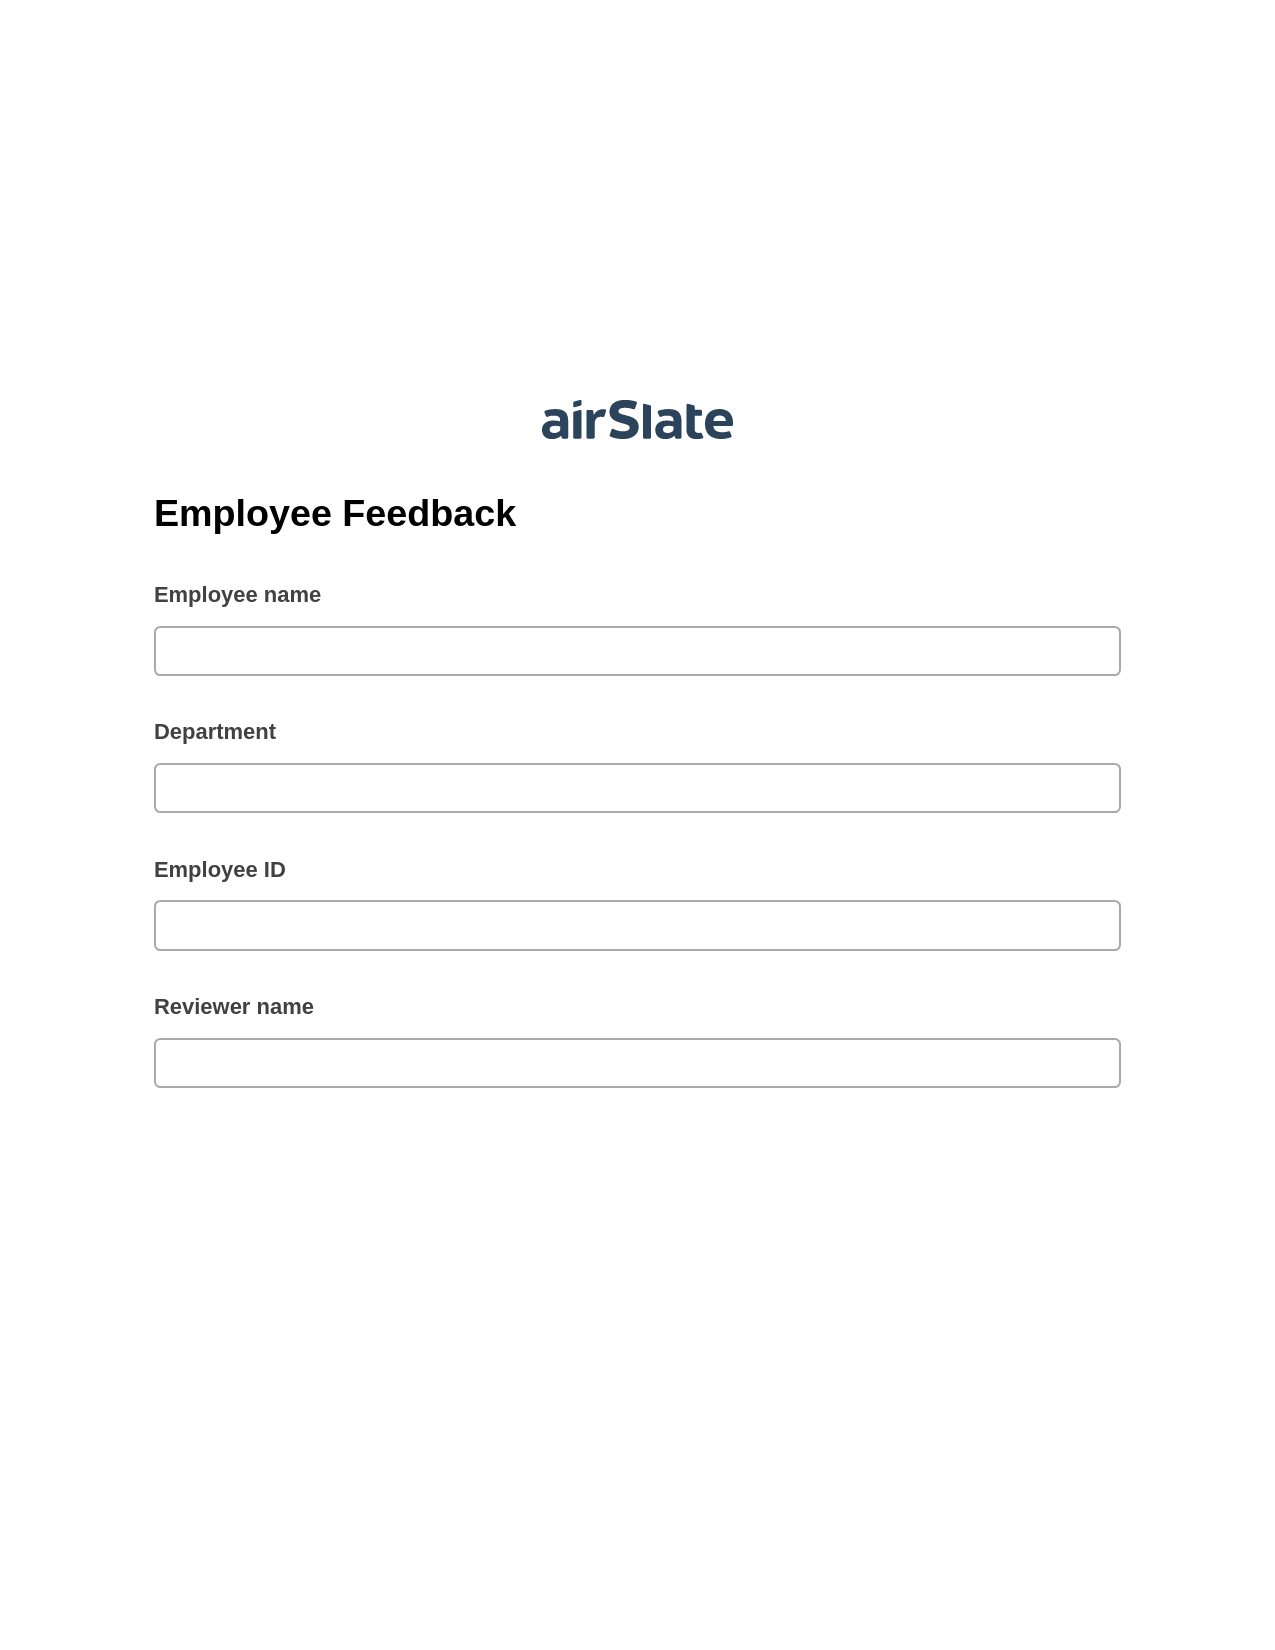 Multirole Employee Feedback Pre-fill from CSV File Bot, Pre-fill with Custom Data Bot, Export to Salesforce Bot